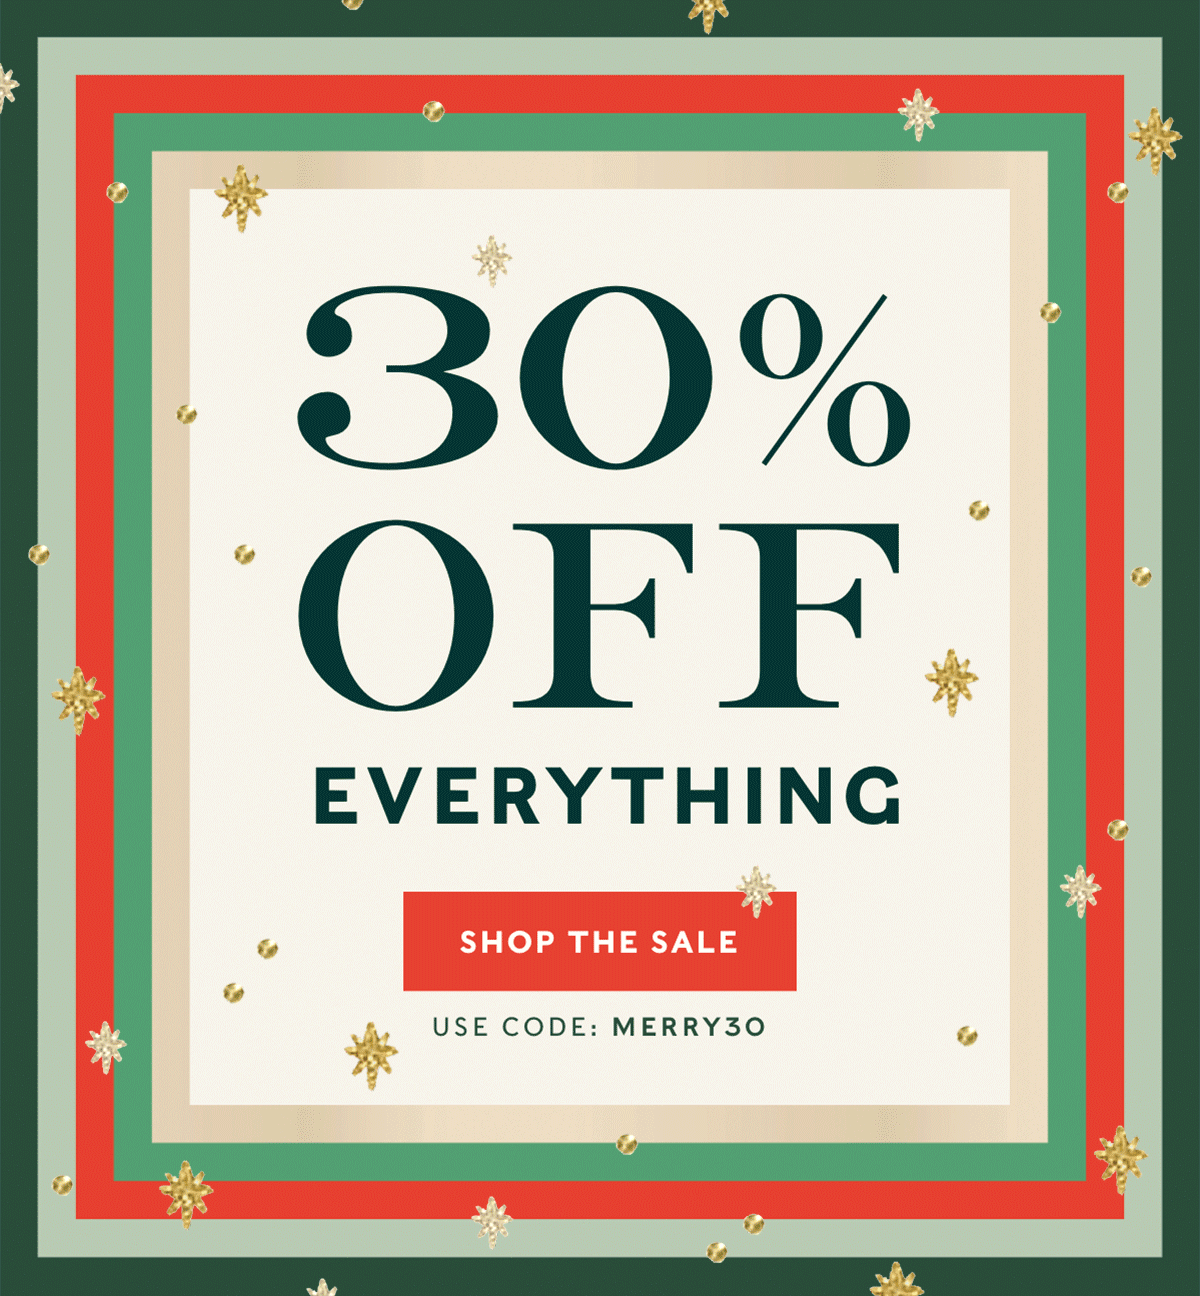 30% Off Everything. Use Code MERRY30